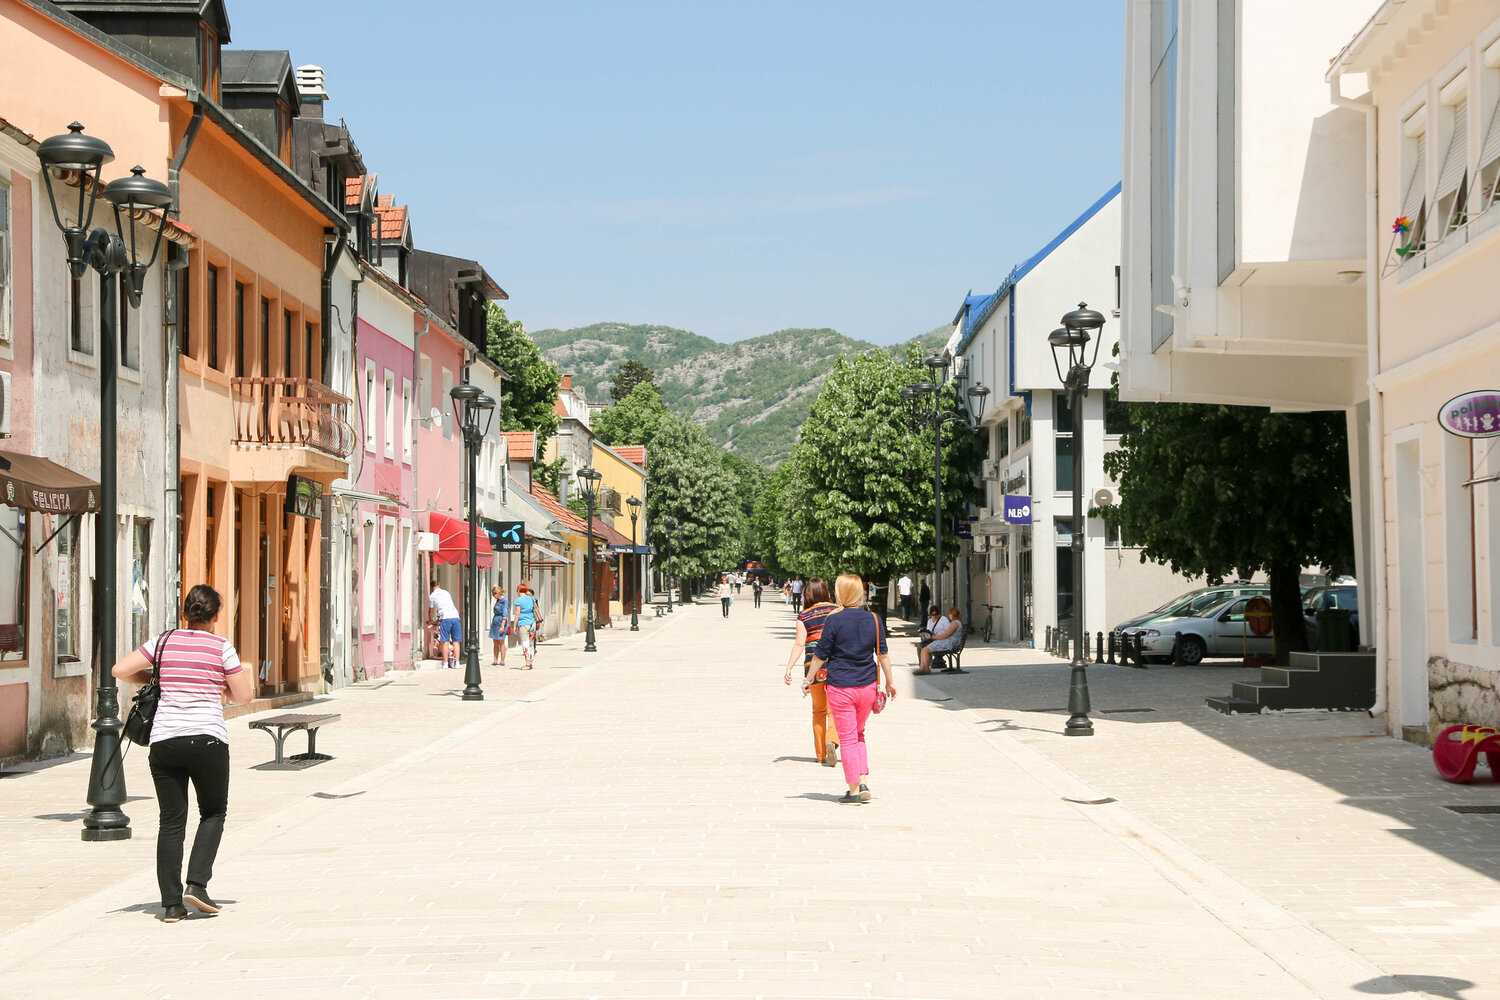 Things to do in Cetinje, Montenegro